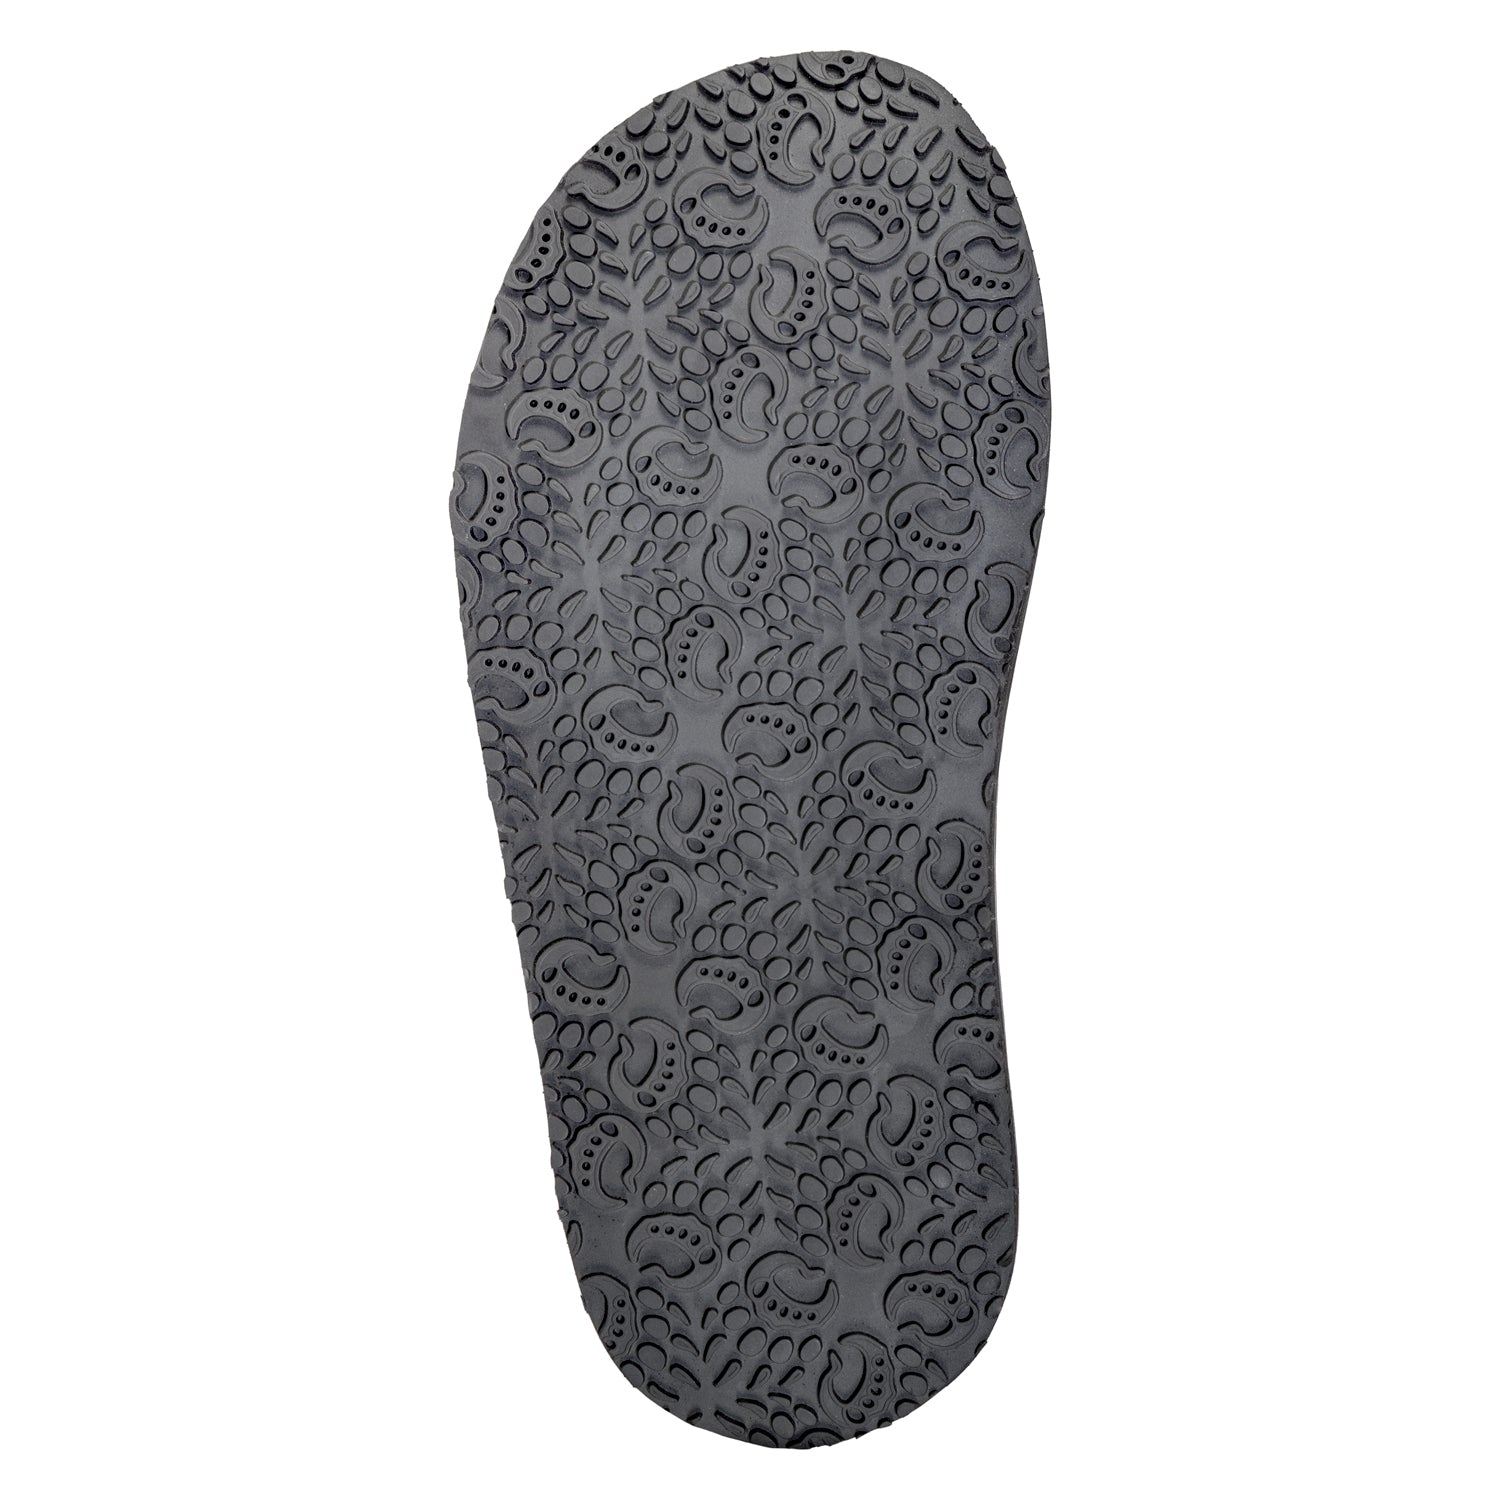 The image shows a close-up of the sole of a Bruin shoe by Bearfoot with a detailed paisley pattern design for grip. The flat outsole is black and exhibits a variety of swirls and teardrop motifs.